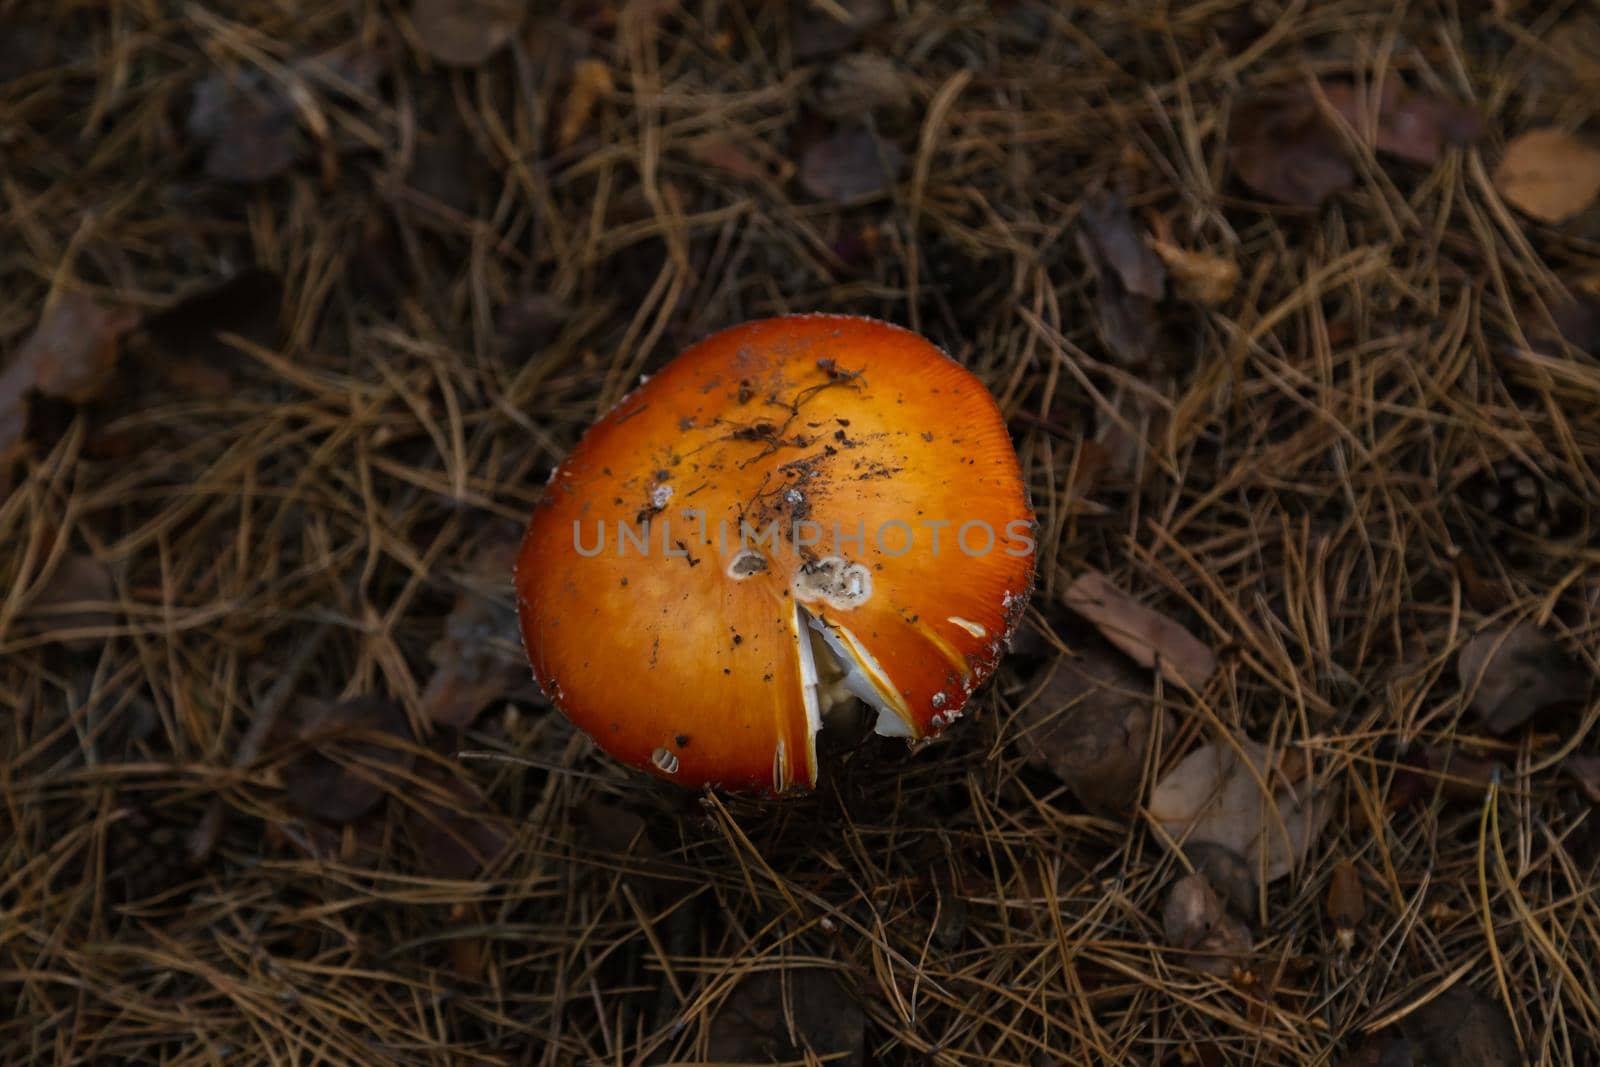 Big fly agaric in the forest. Big red and white fly agaric in the forest growing in the grass.